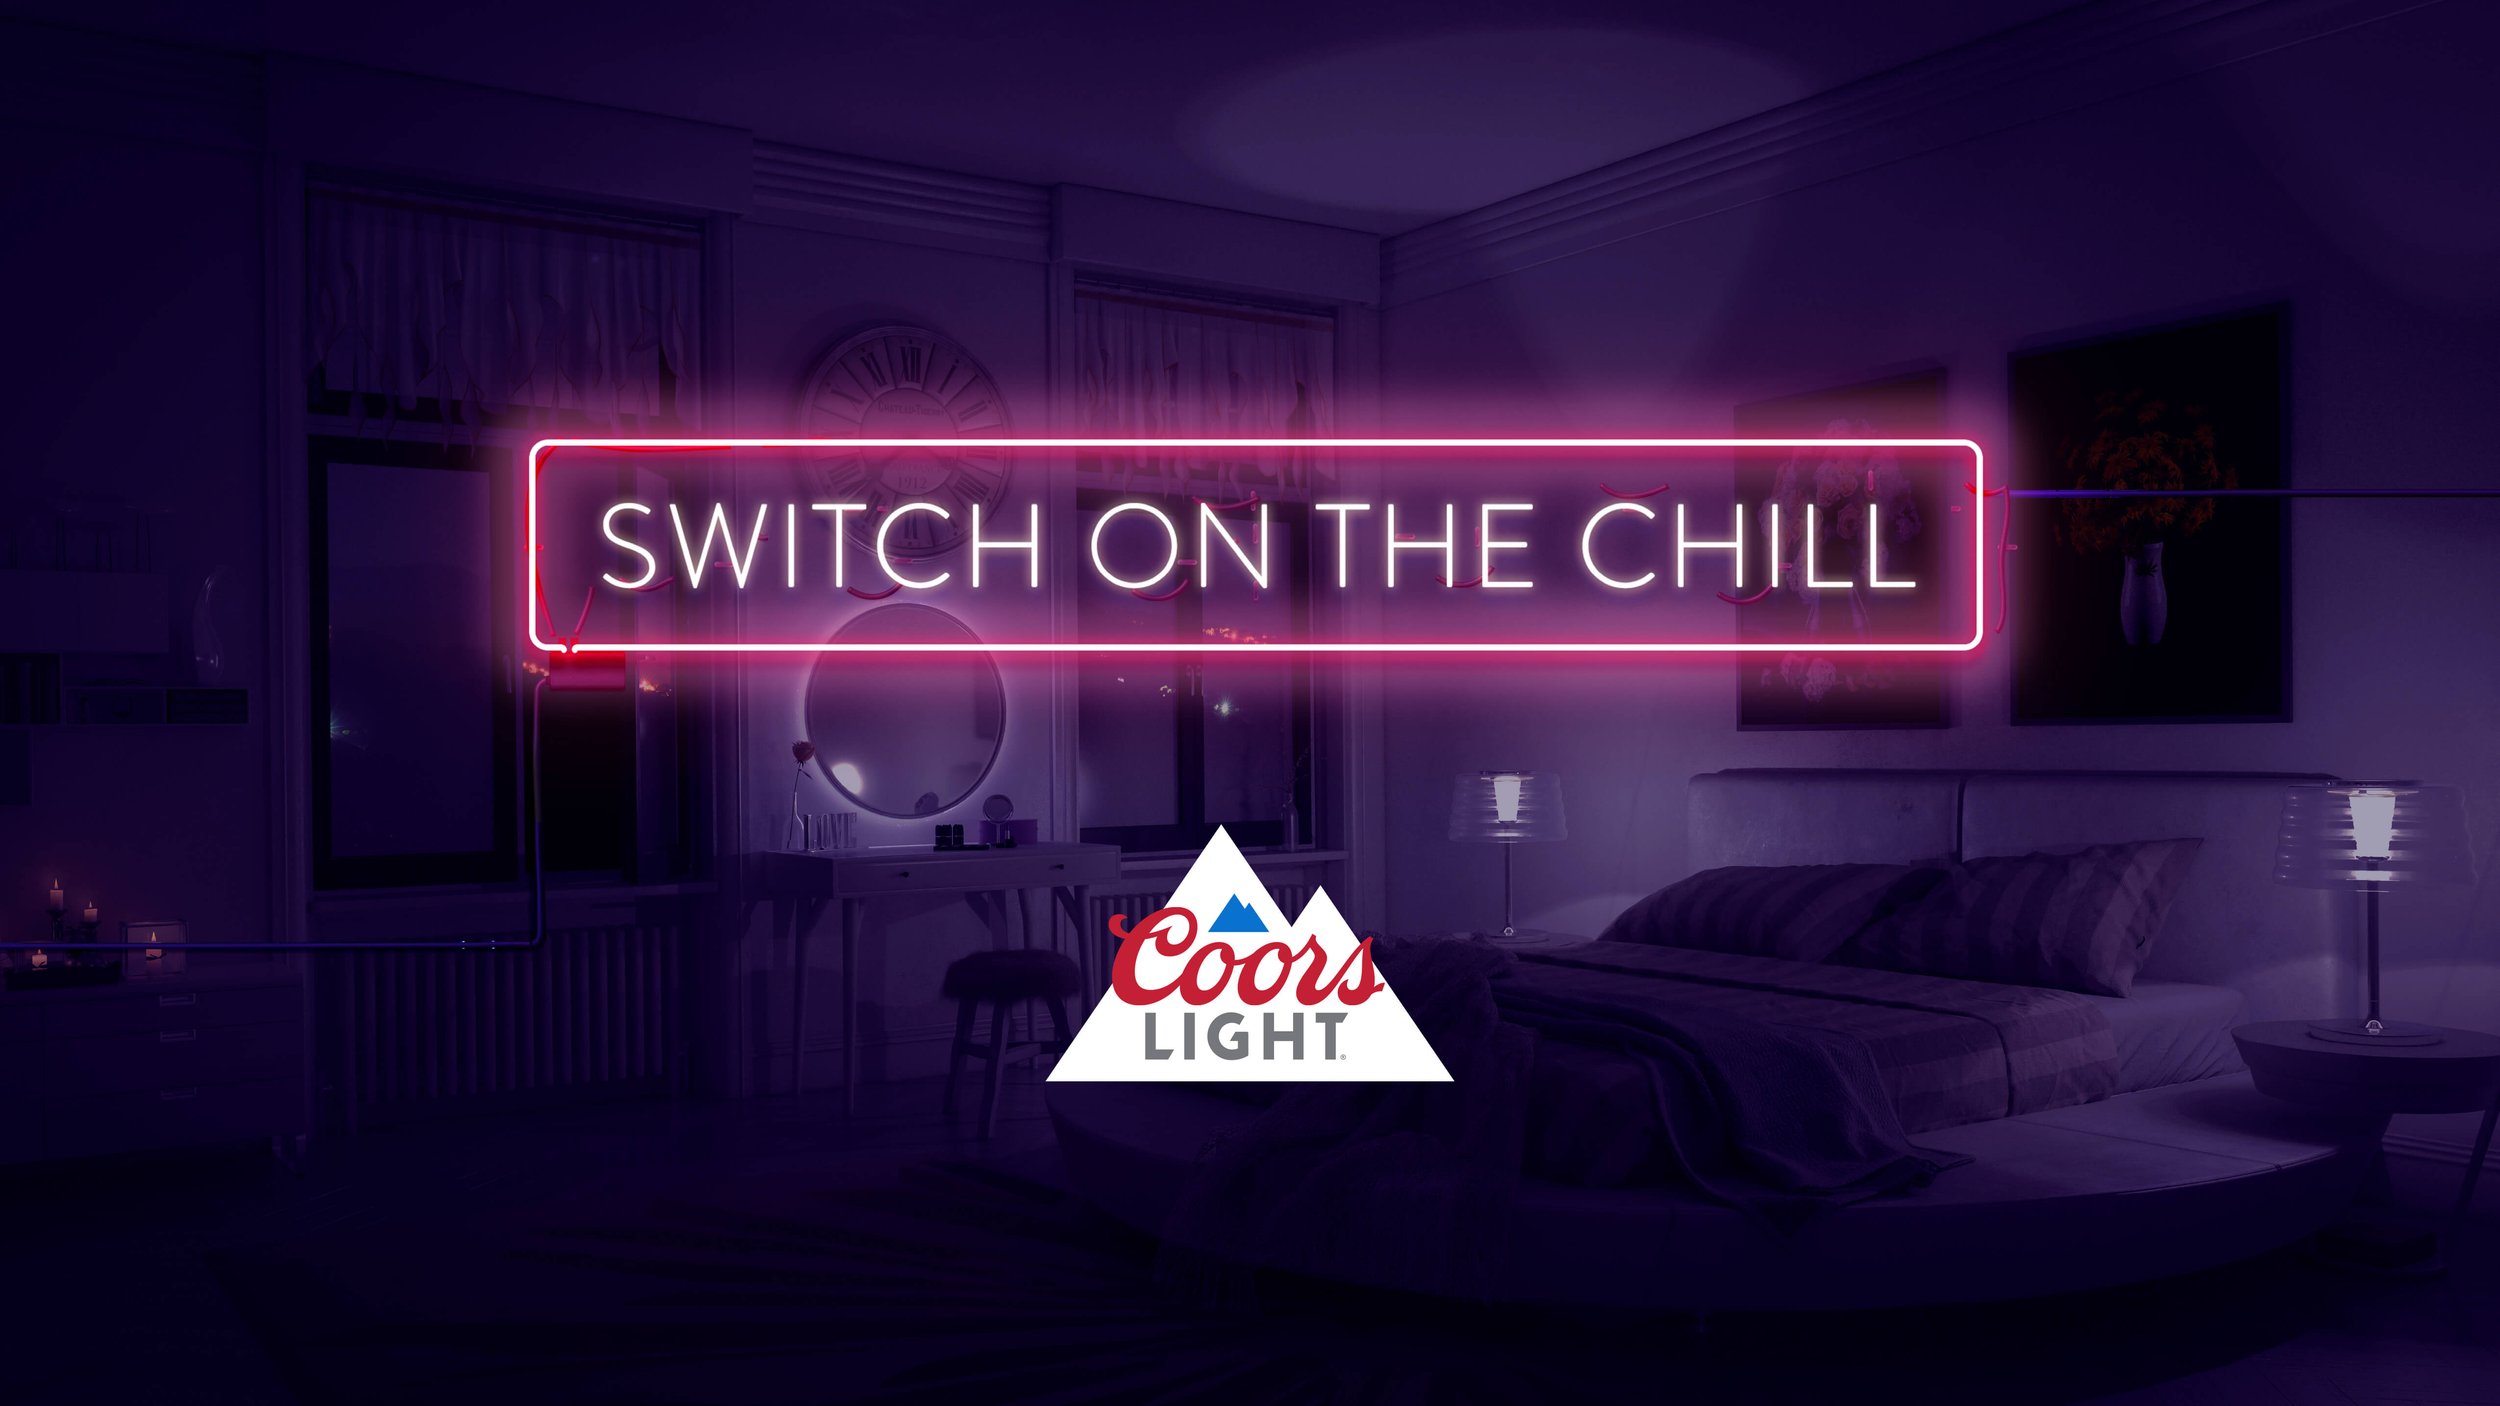 coors-light-switch-on-the-chill-1.jpg